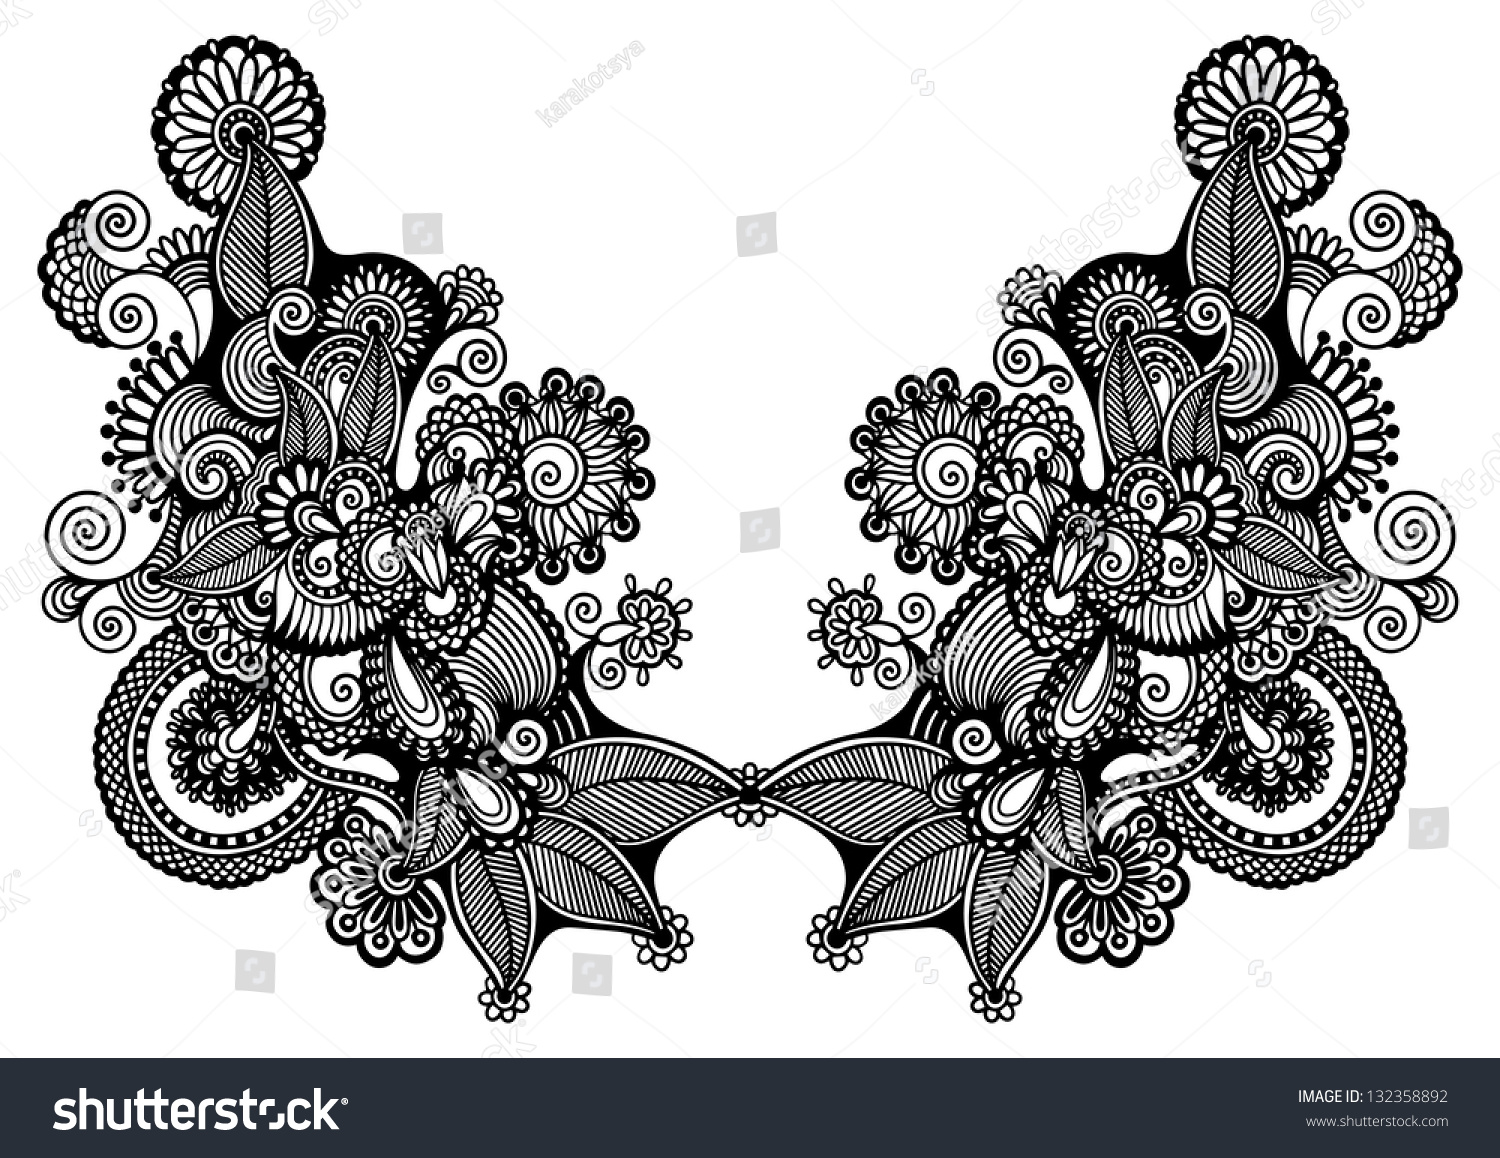 Neckline Embroidery Fashion Stock Vector Royalty Free 132358892